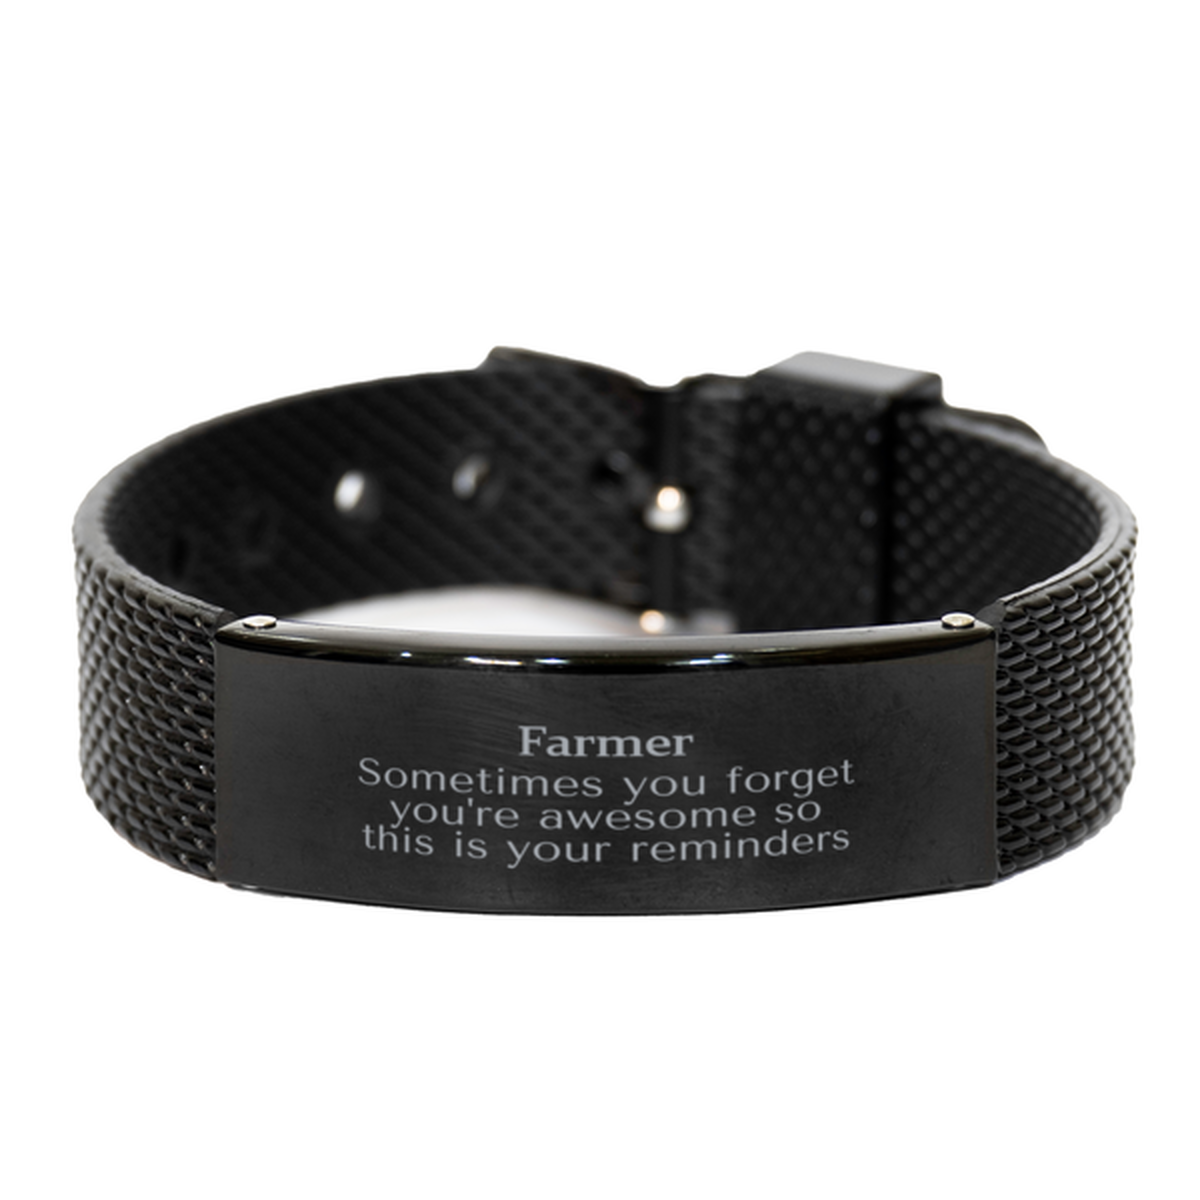 Sentimental Farmer Black Shark Mesh Bracelet, Farmer Sometimes you forget you're awesome so this is your reminders, Graduation Christmas Birthday Gifts for Farmer, Men, Women, Coworkers